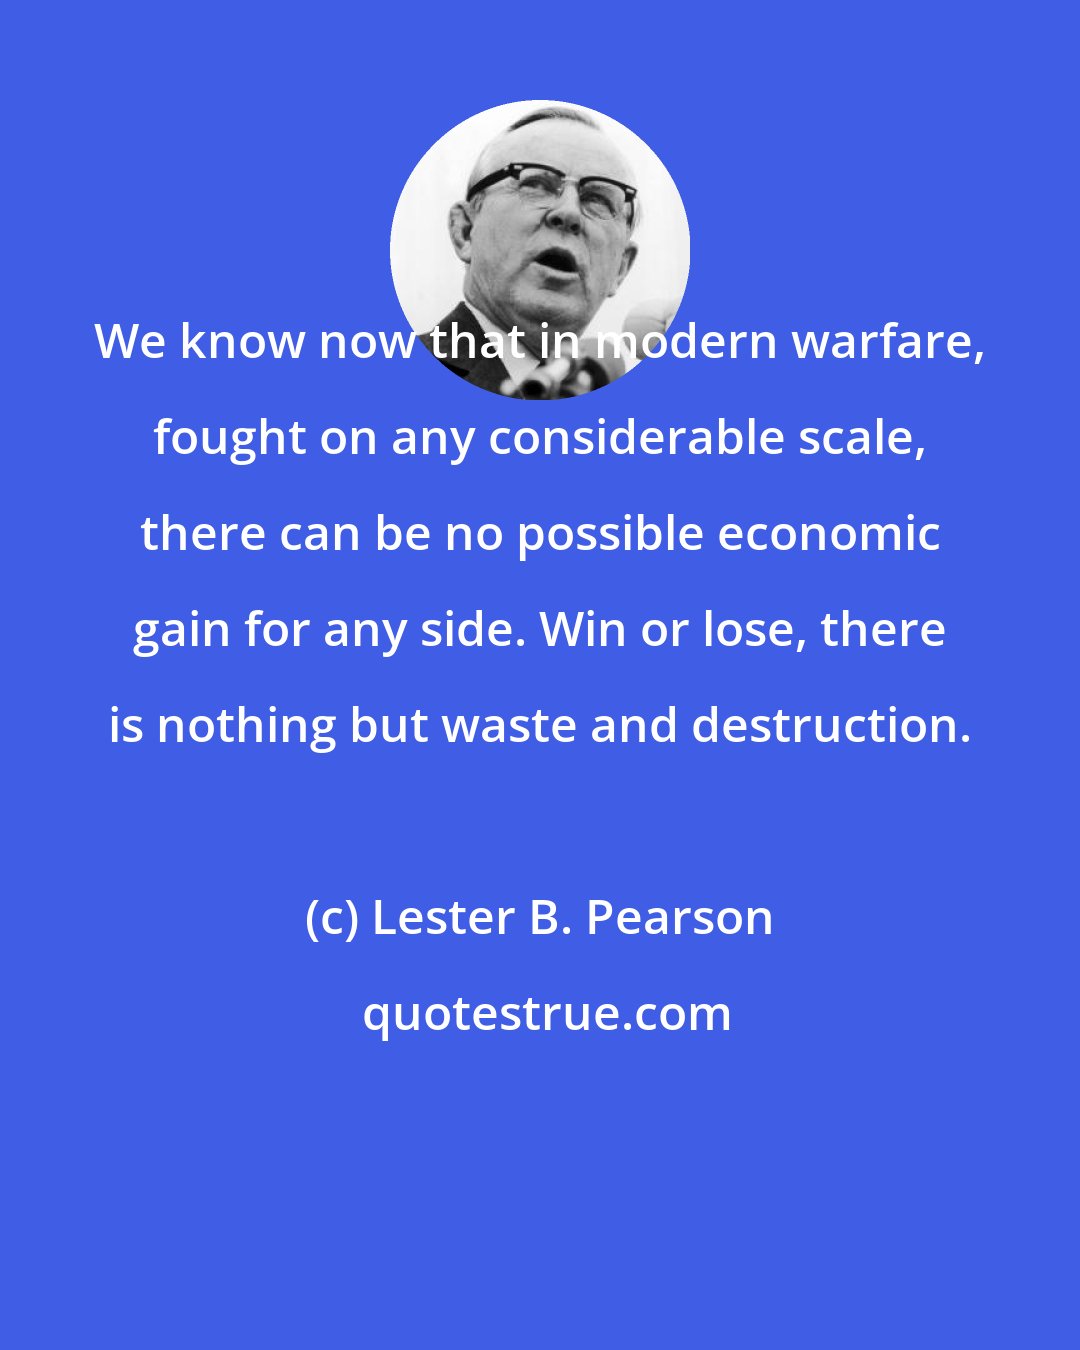 Lester B. Pearson: We know now that in modern warfare, fought on any considerable scale, there can be no possible economic gain for any side. Win or lose, there is nothing but waste and destruction.